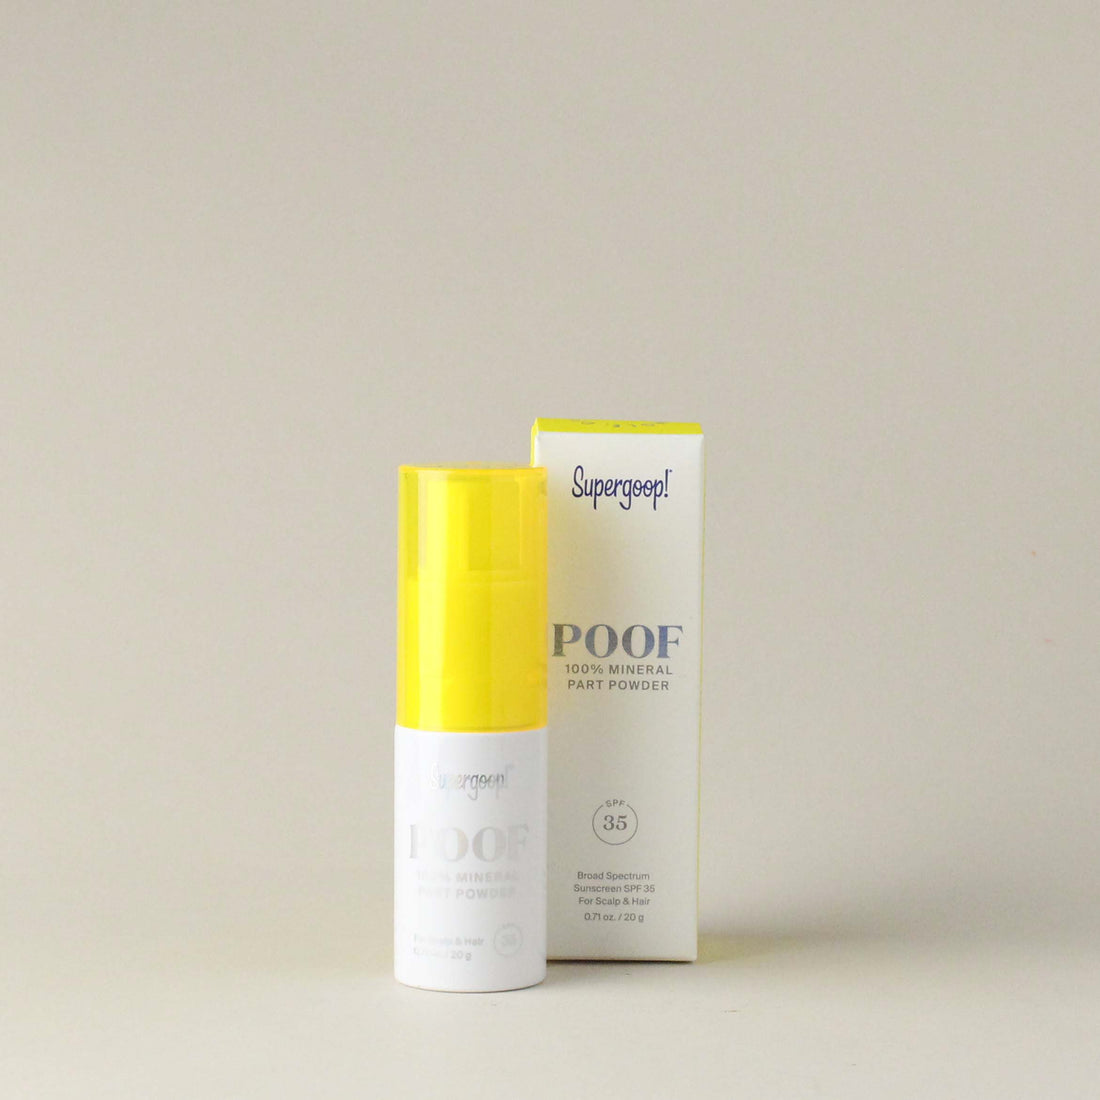 Poof Part Powder Mineral SPF 35